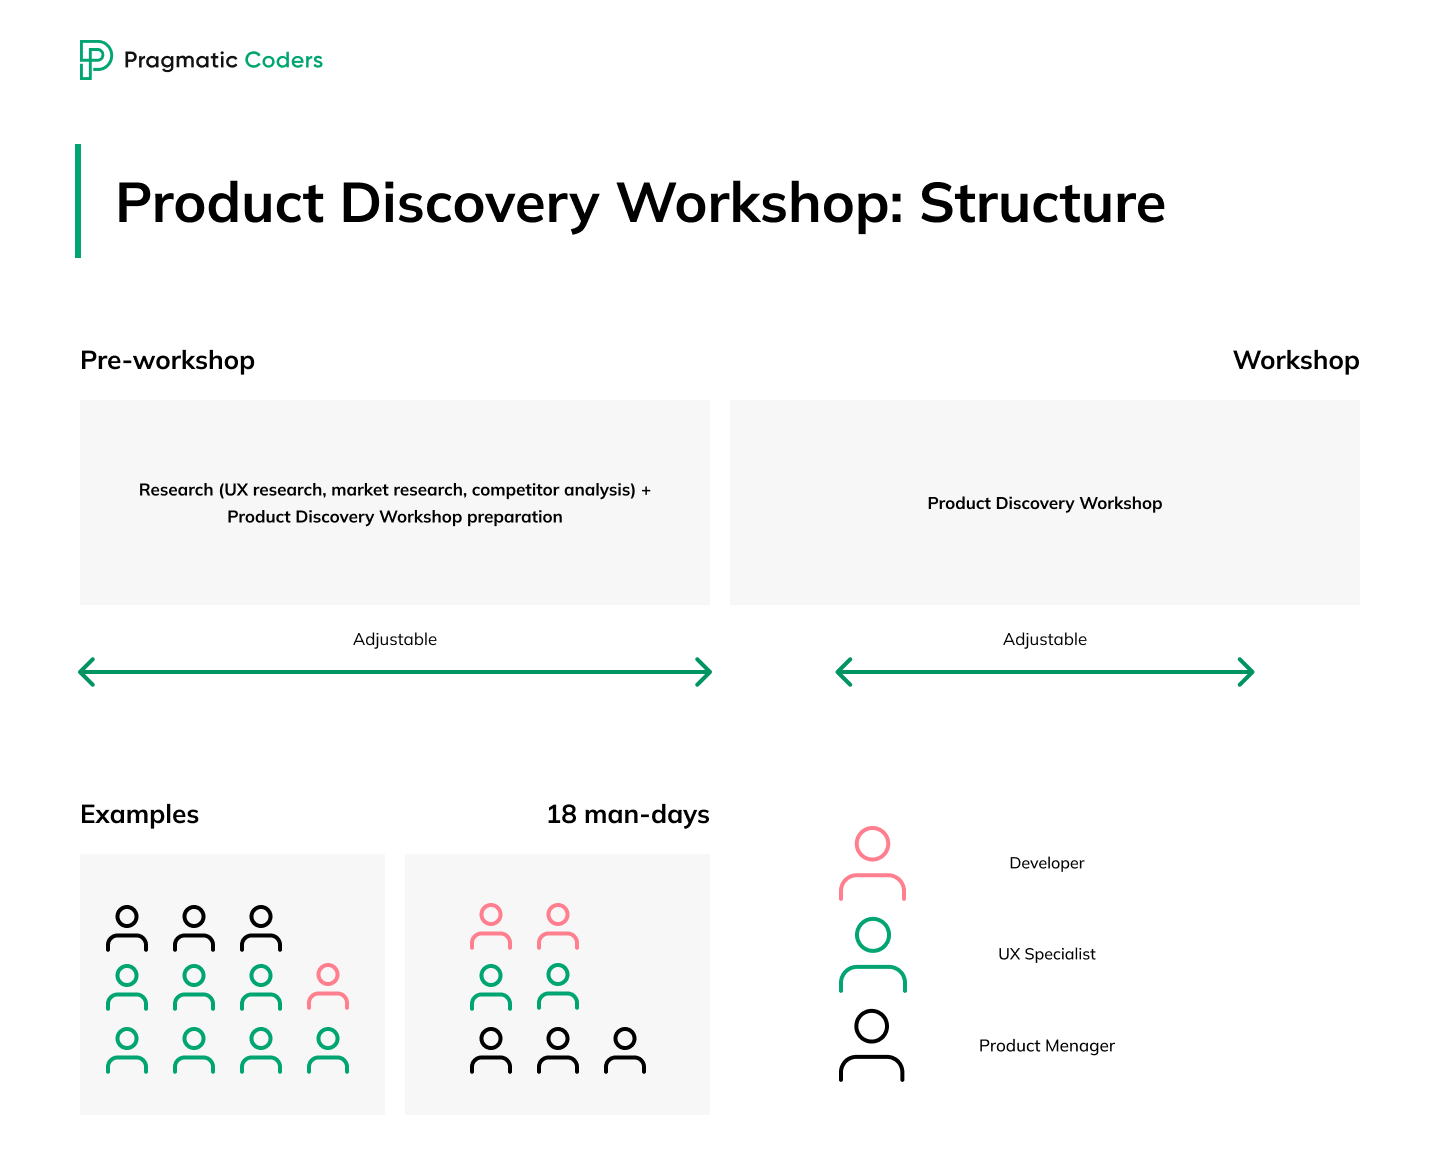 Product Discovery Workshop - structure